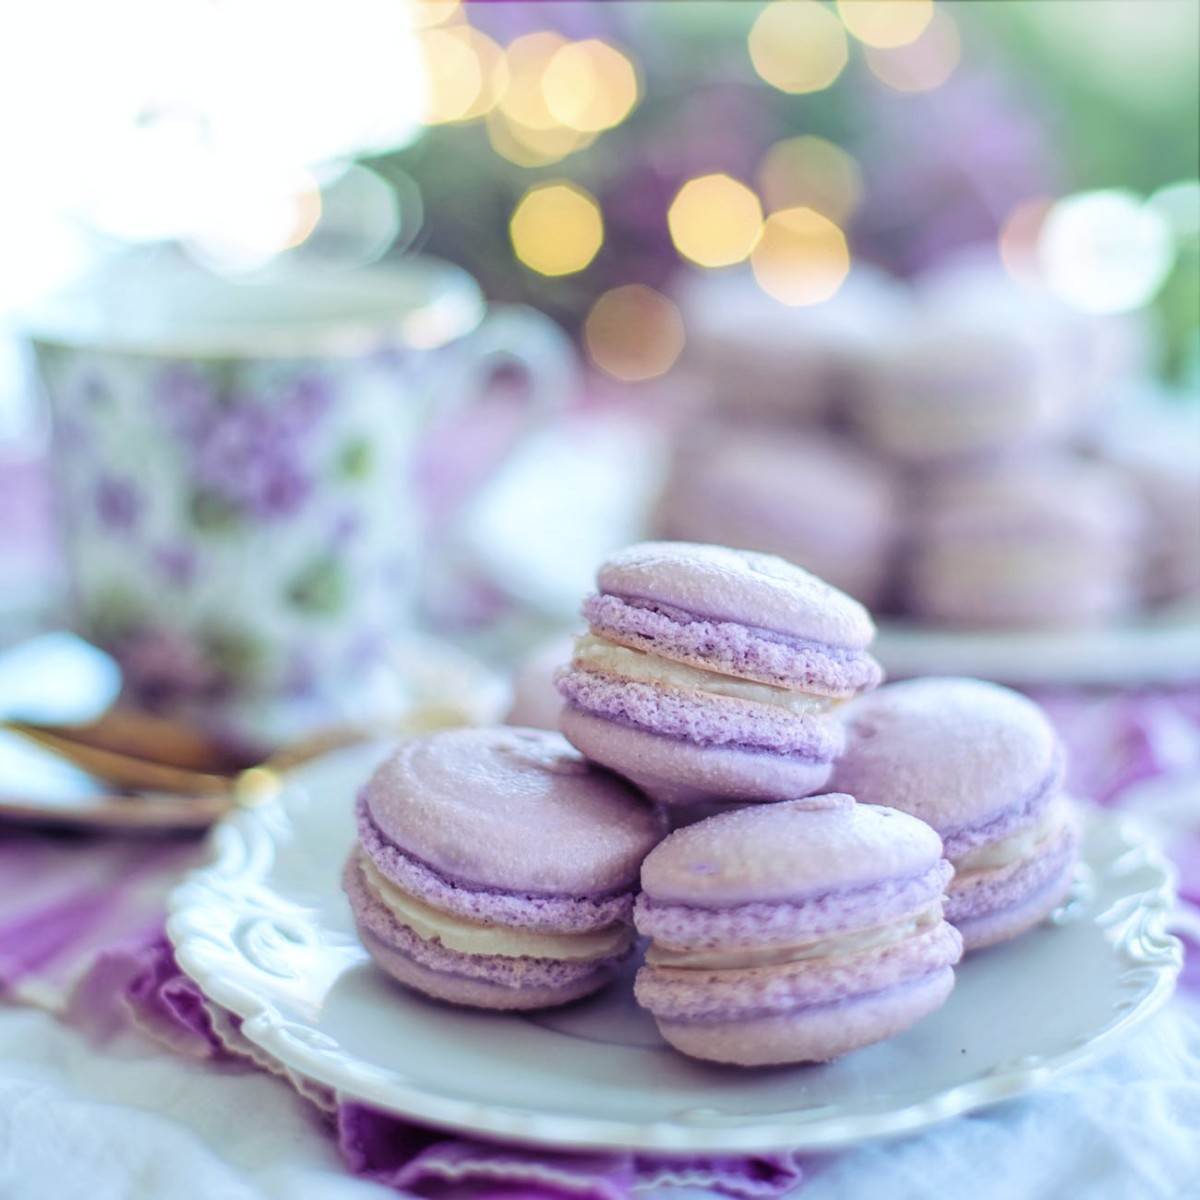 close up photo of macarons on plate